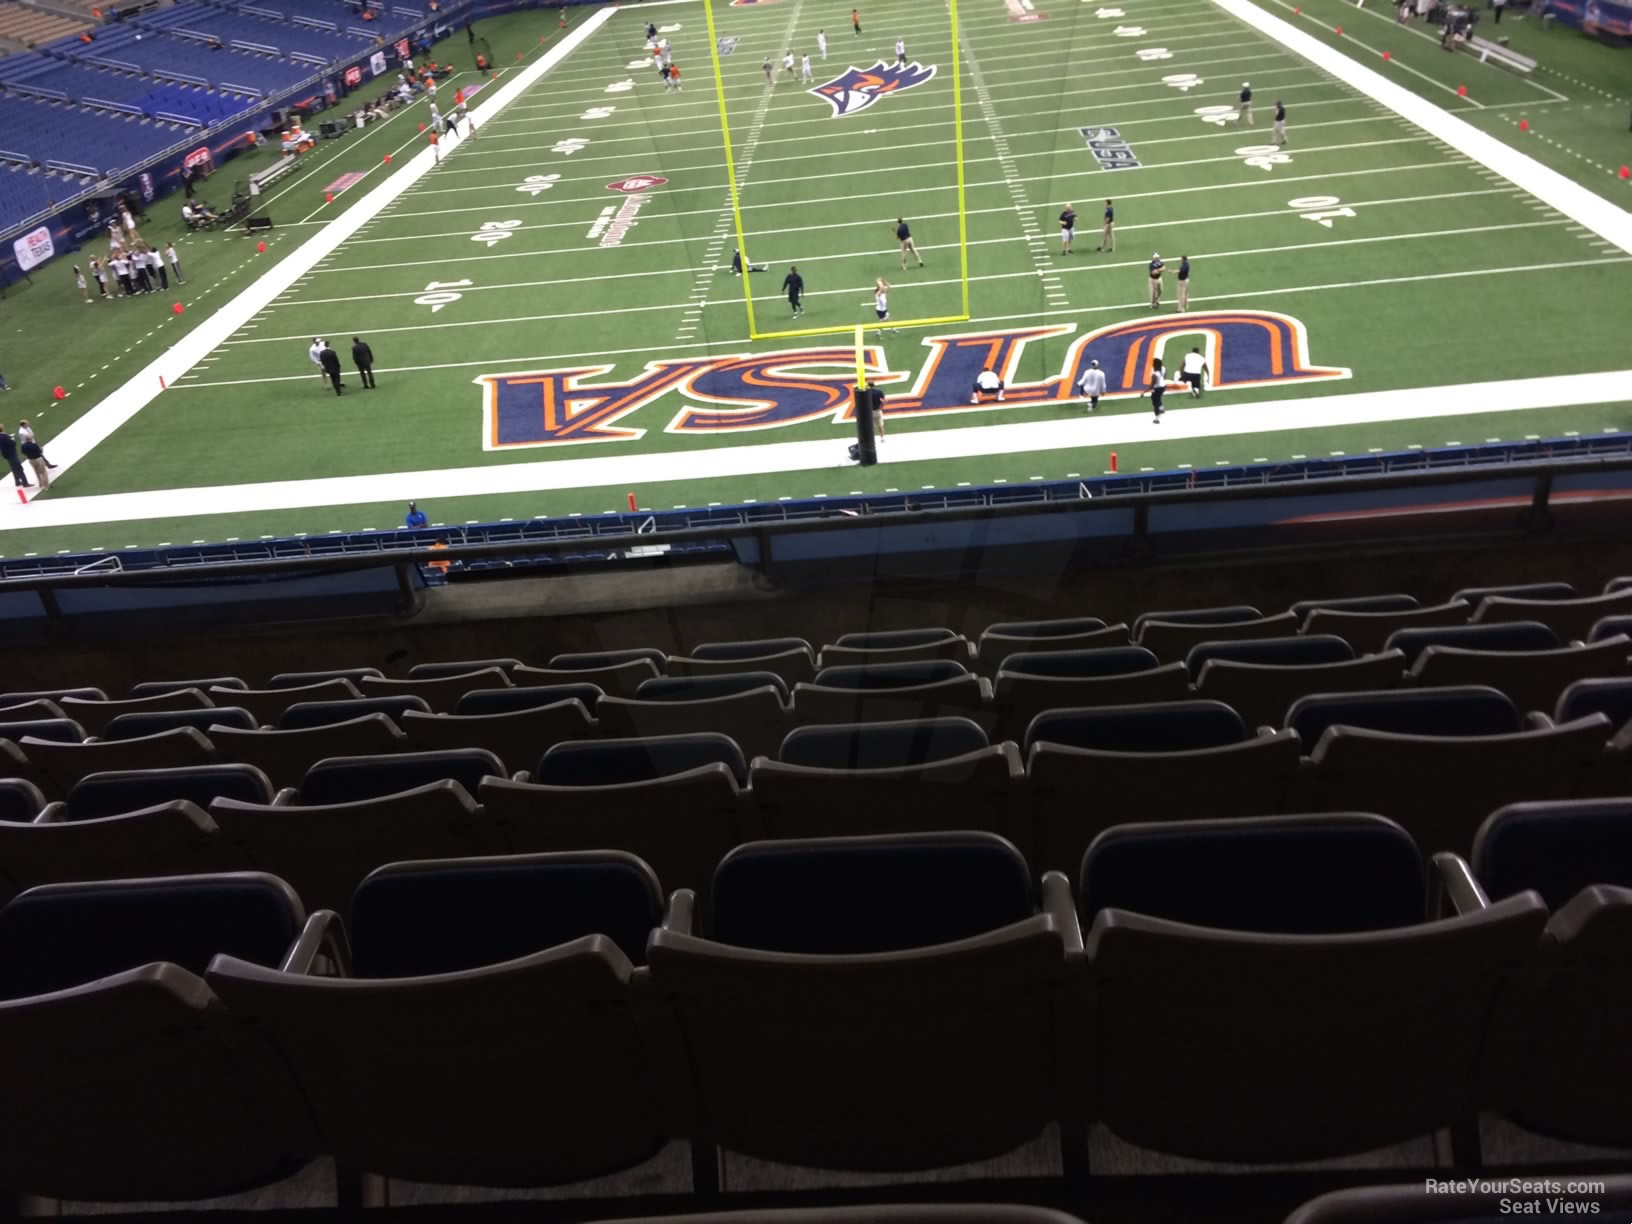 section 201, row 5 seat view  for football - alamodome